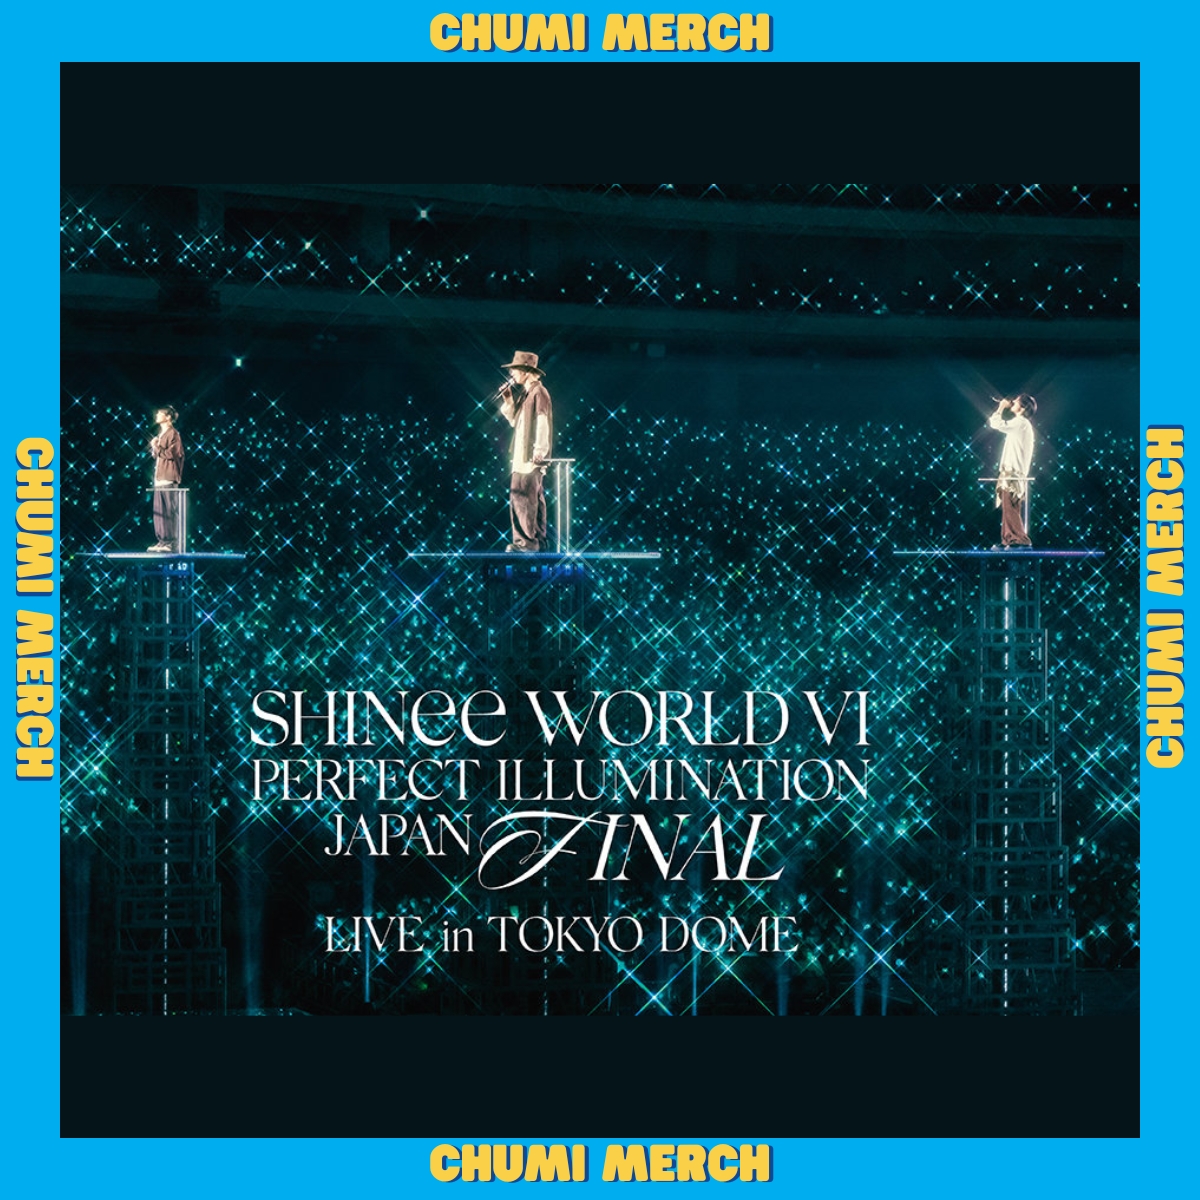 [Regular Edition] SHINee WORLD VI CONCERT: 'PERFECT ILLUMINATION' JAPAN FINAL LIVE in TOKYO DOME 🎁 Event Gift POB: • Universal Music: A3 poster • Tower Records: bromide (solo photo) • HMV: smartphone size sticker (solo photo) • Amazon: compact mirror • Weverse Japan: clear…